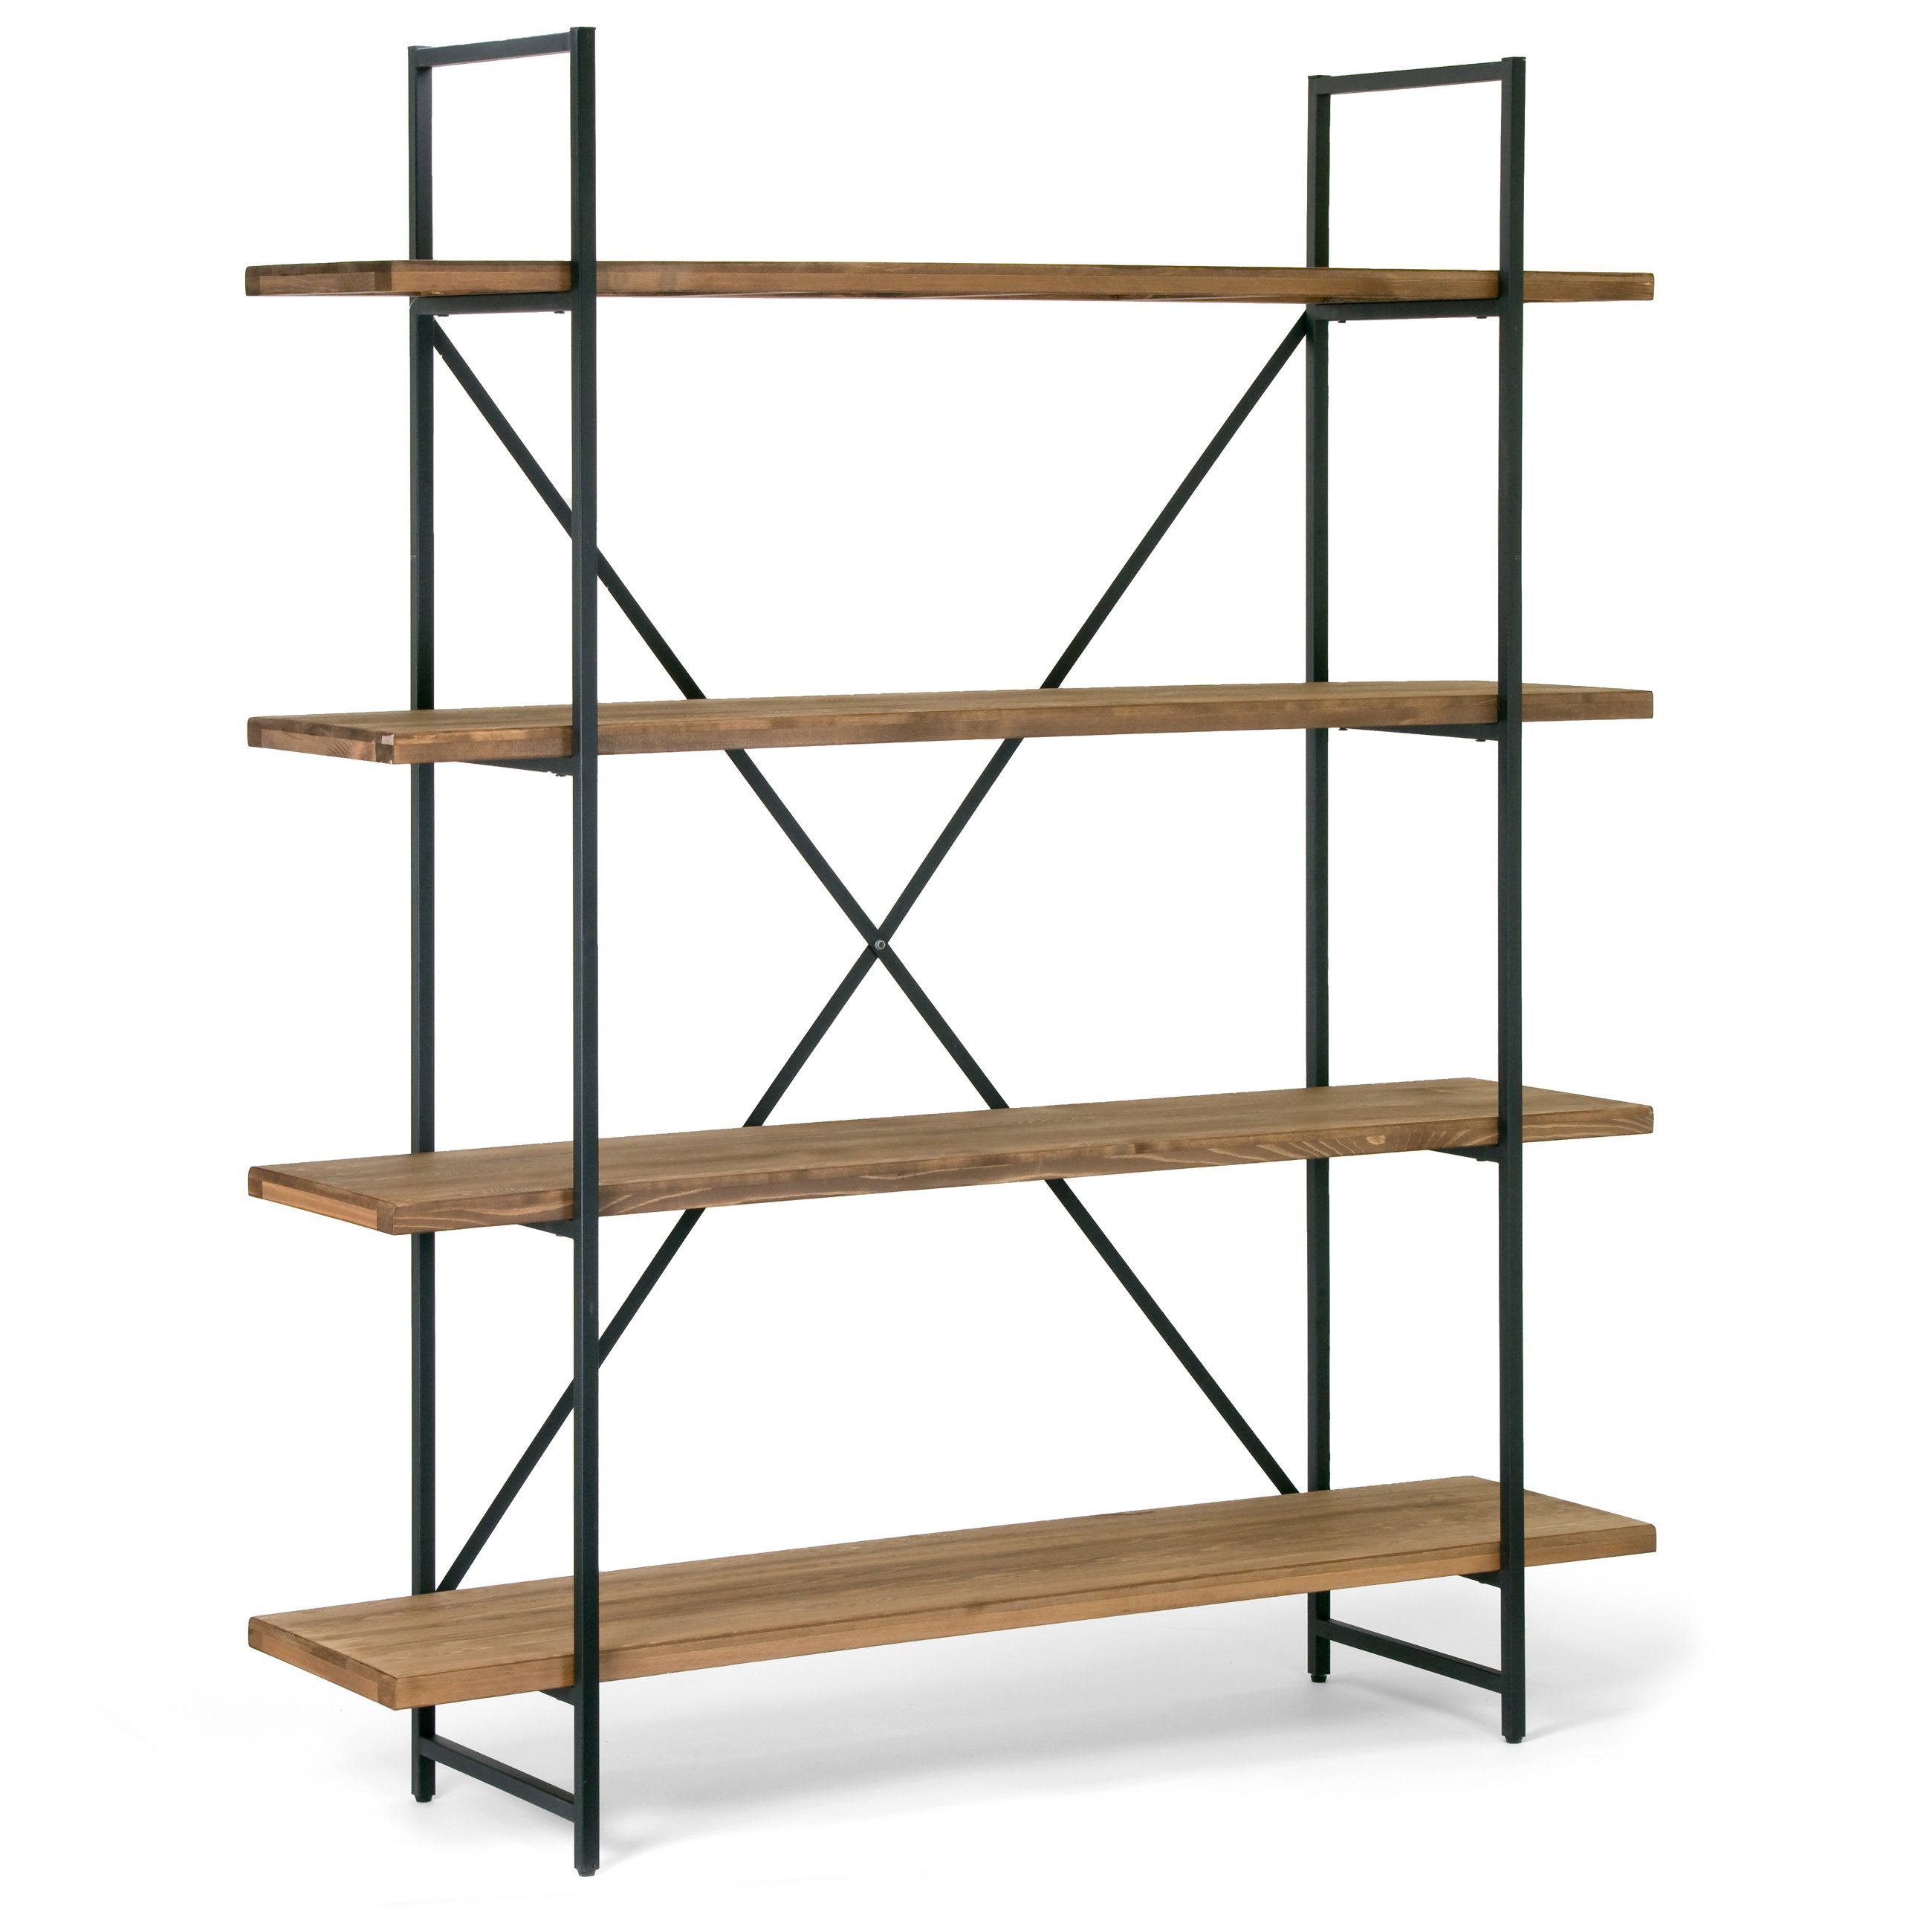 Preferred Woodcrest Etagere Bookcases With Regard To Zipcode Design Champney Modern Etagere Bookcase (View 6 of 20)